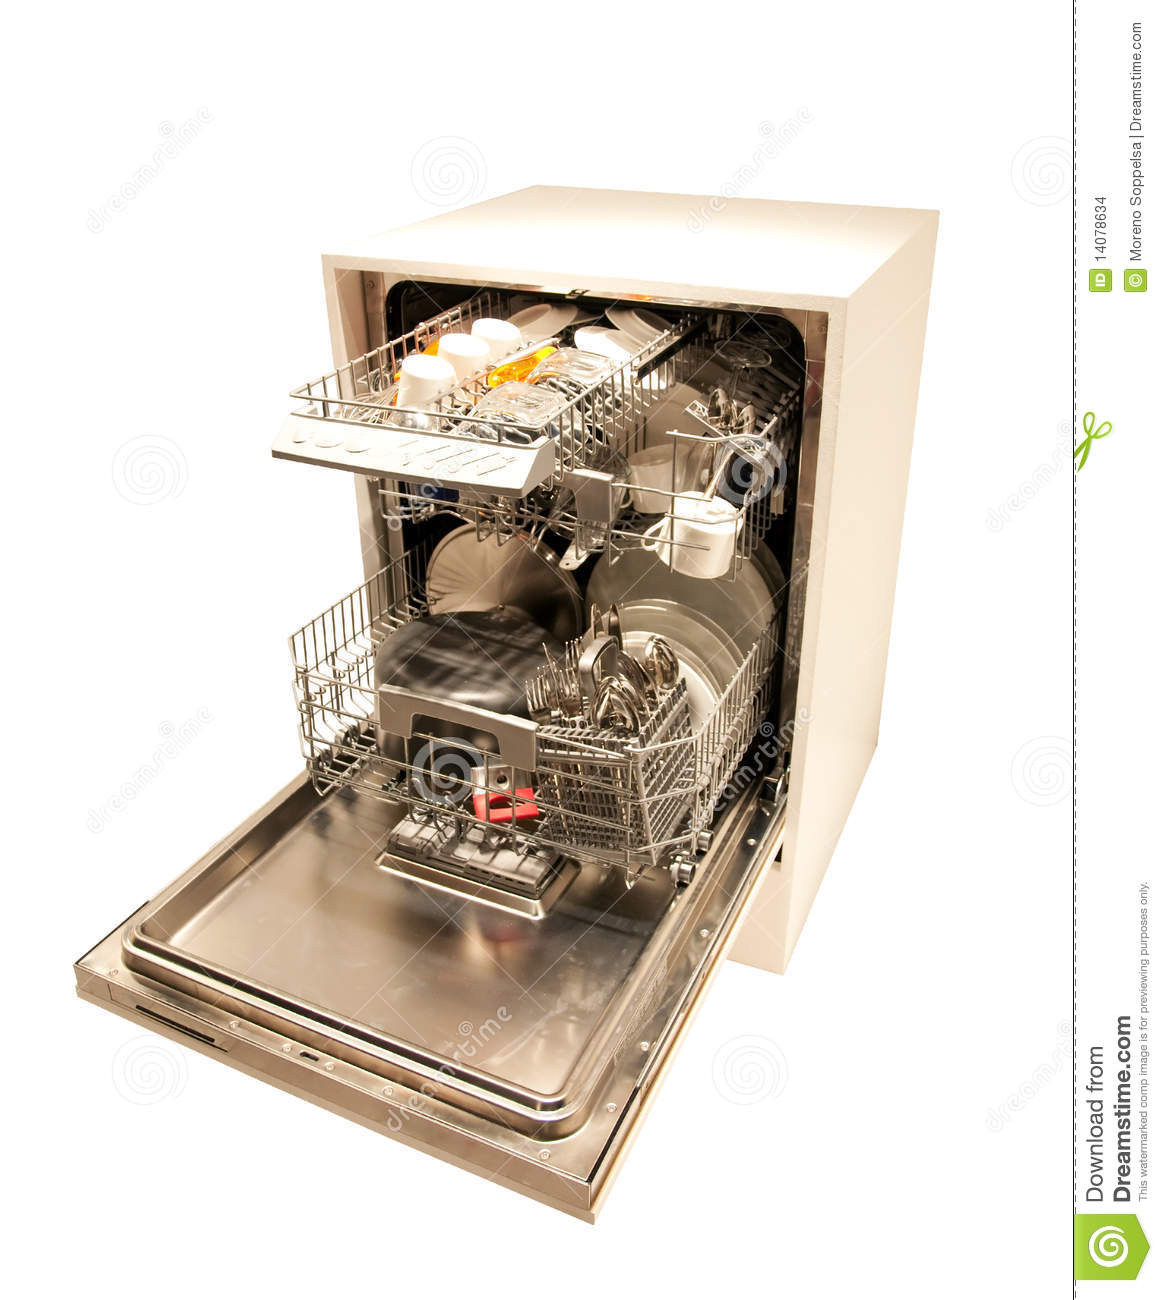 Modern Dishwasher Open Filled With Dishes And Cutlery Isolated On